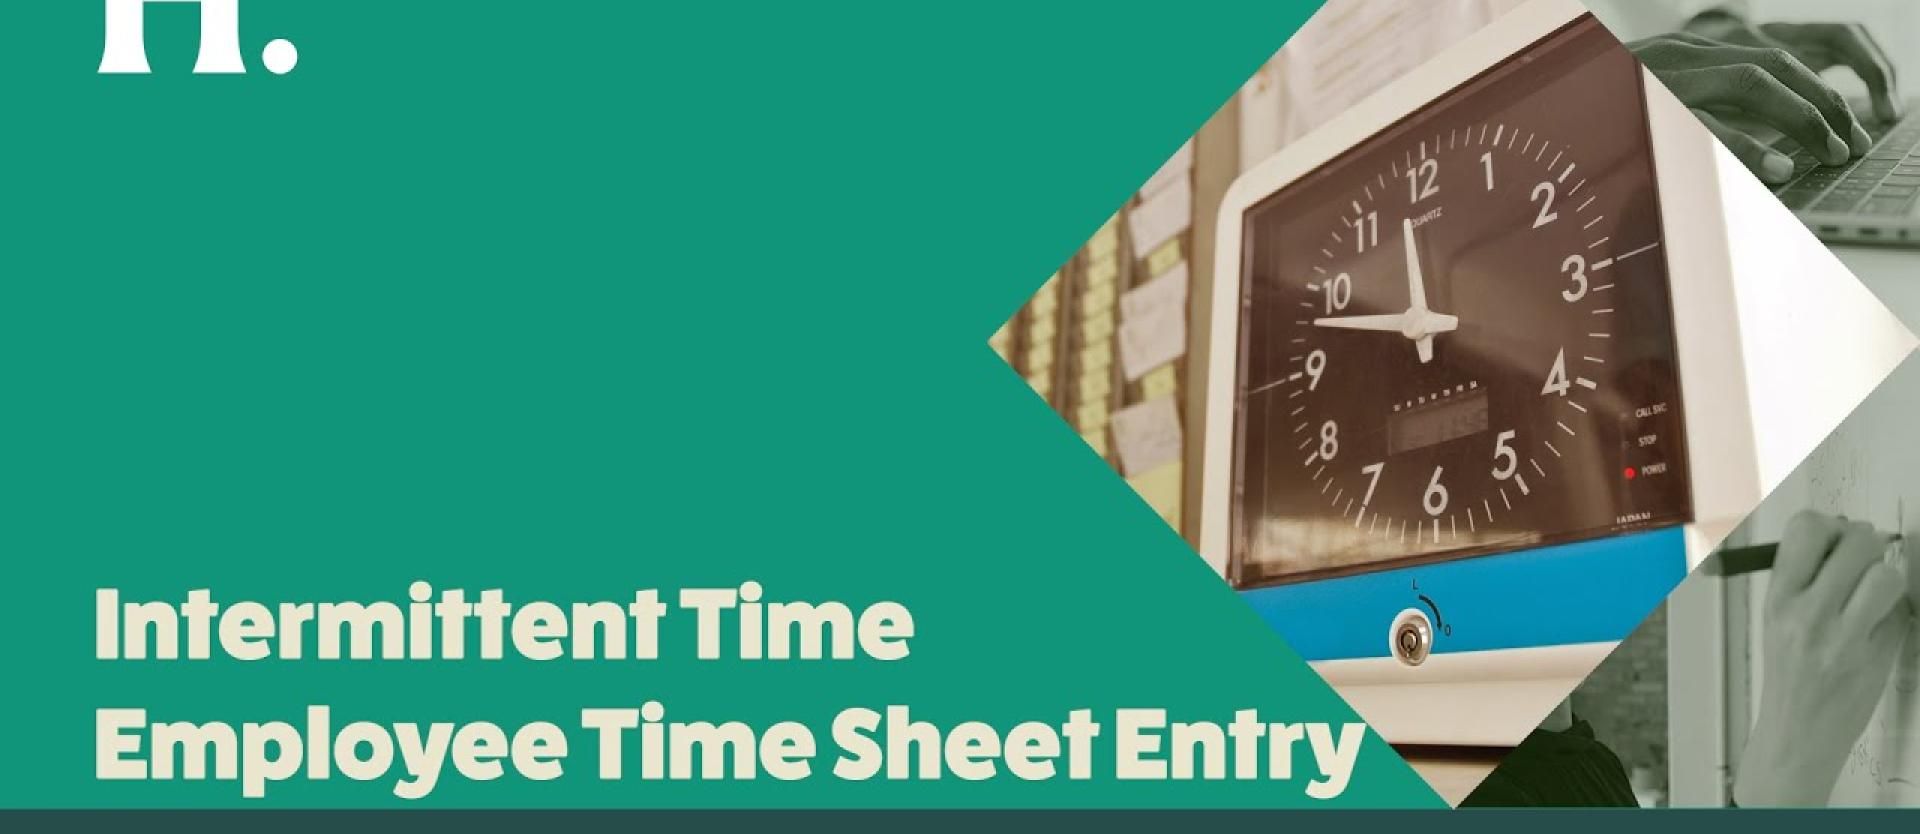 Thumbnail for Intermittent Time Employee Time Sheet Entry